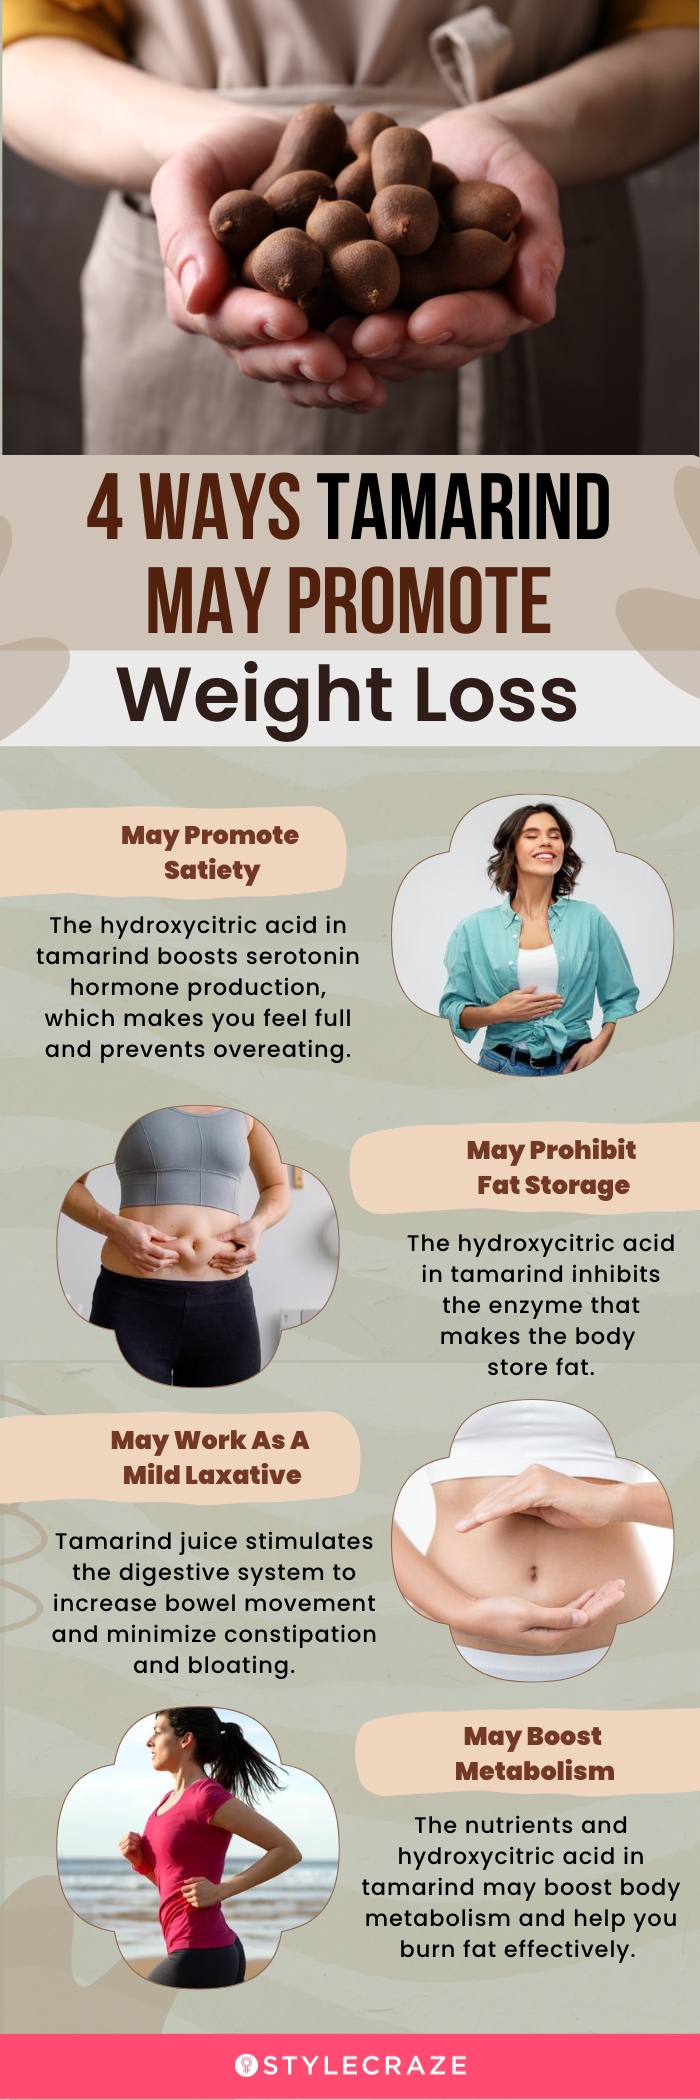 4 ways tamarind may help in weight loss [infographic]